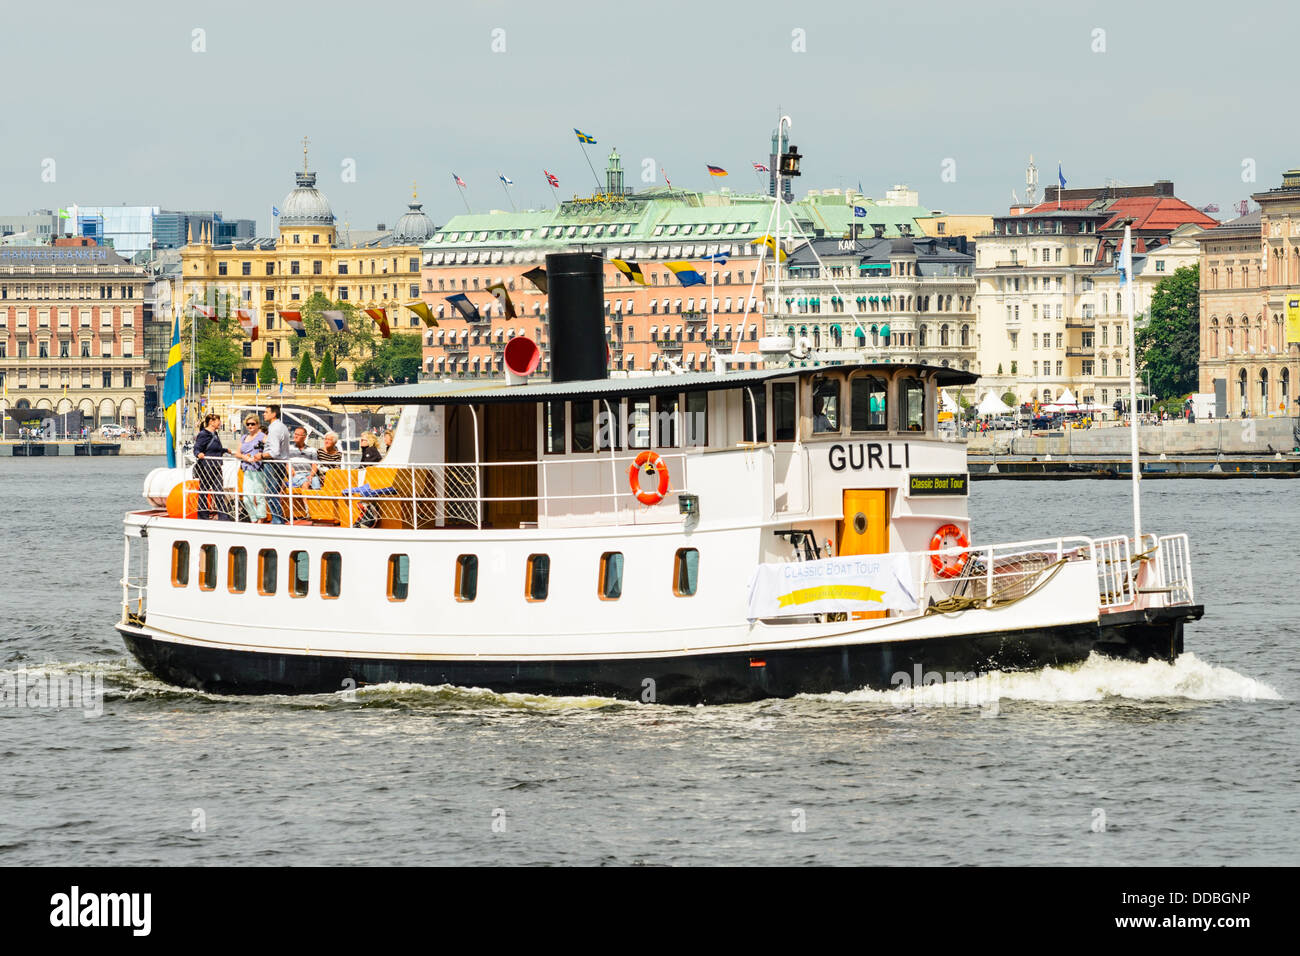 Sightseeing boat 'Gurli' at Norrstrom Stockholm Sweden with the Grand Hotel behind Stock Photo